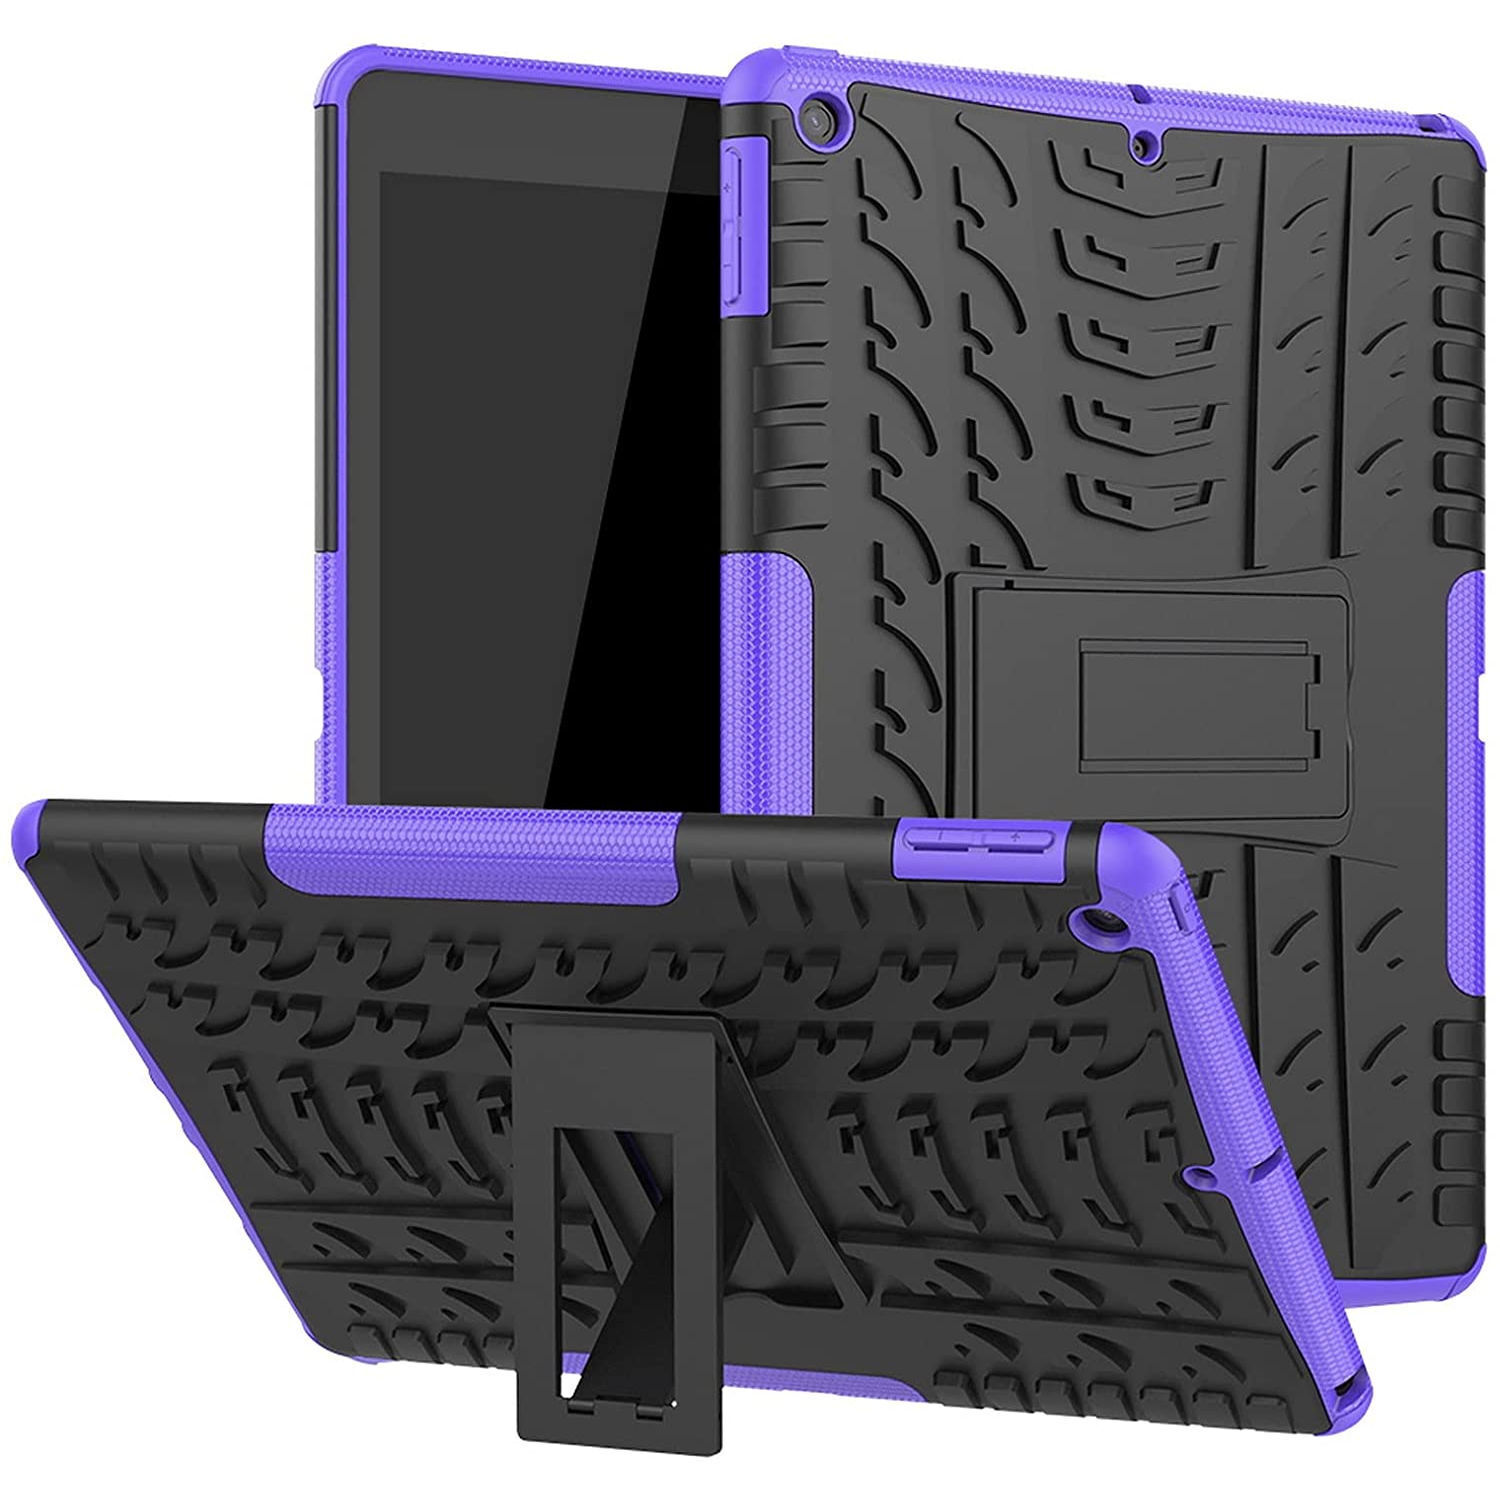 Exoskeleton Hybrid Armor Case with Kickstand for iPad 10.2 inch (9th, 8th & 7th